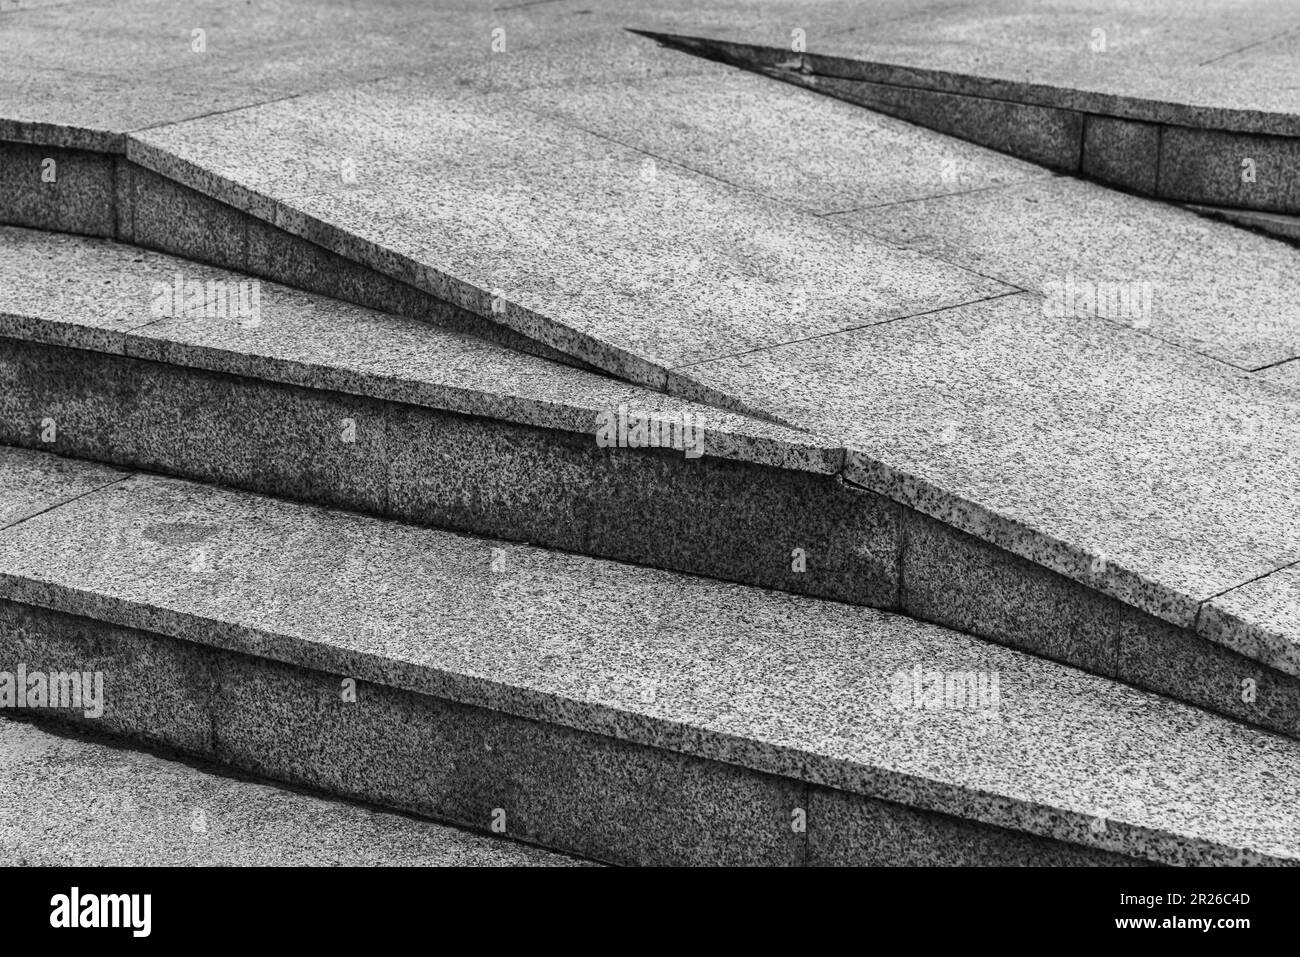 Granite stairs with a ramp, close up, abstract architecture background photo Stock Photo